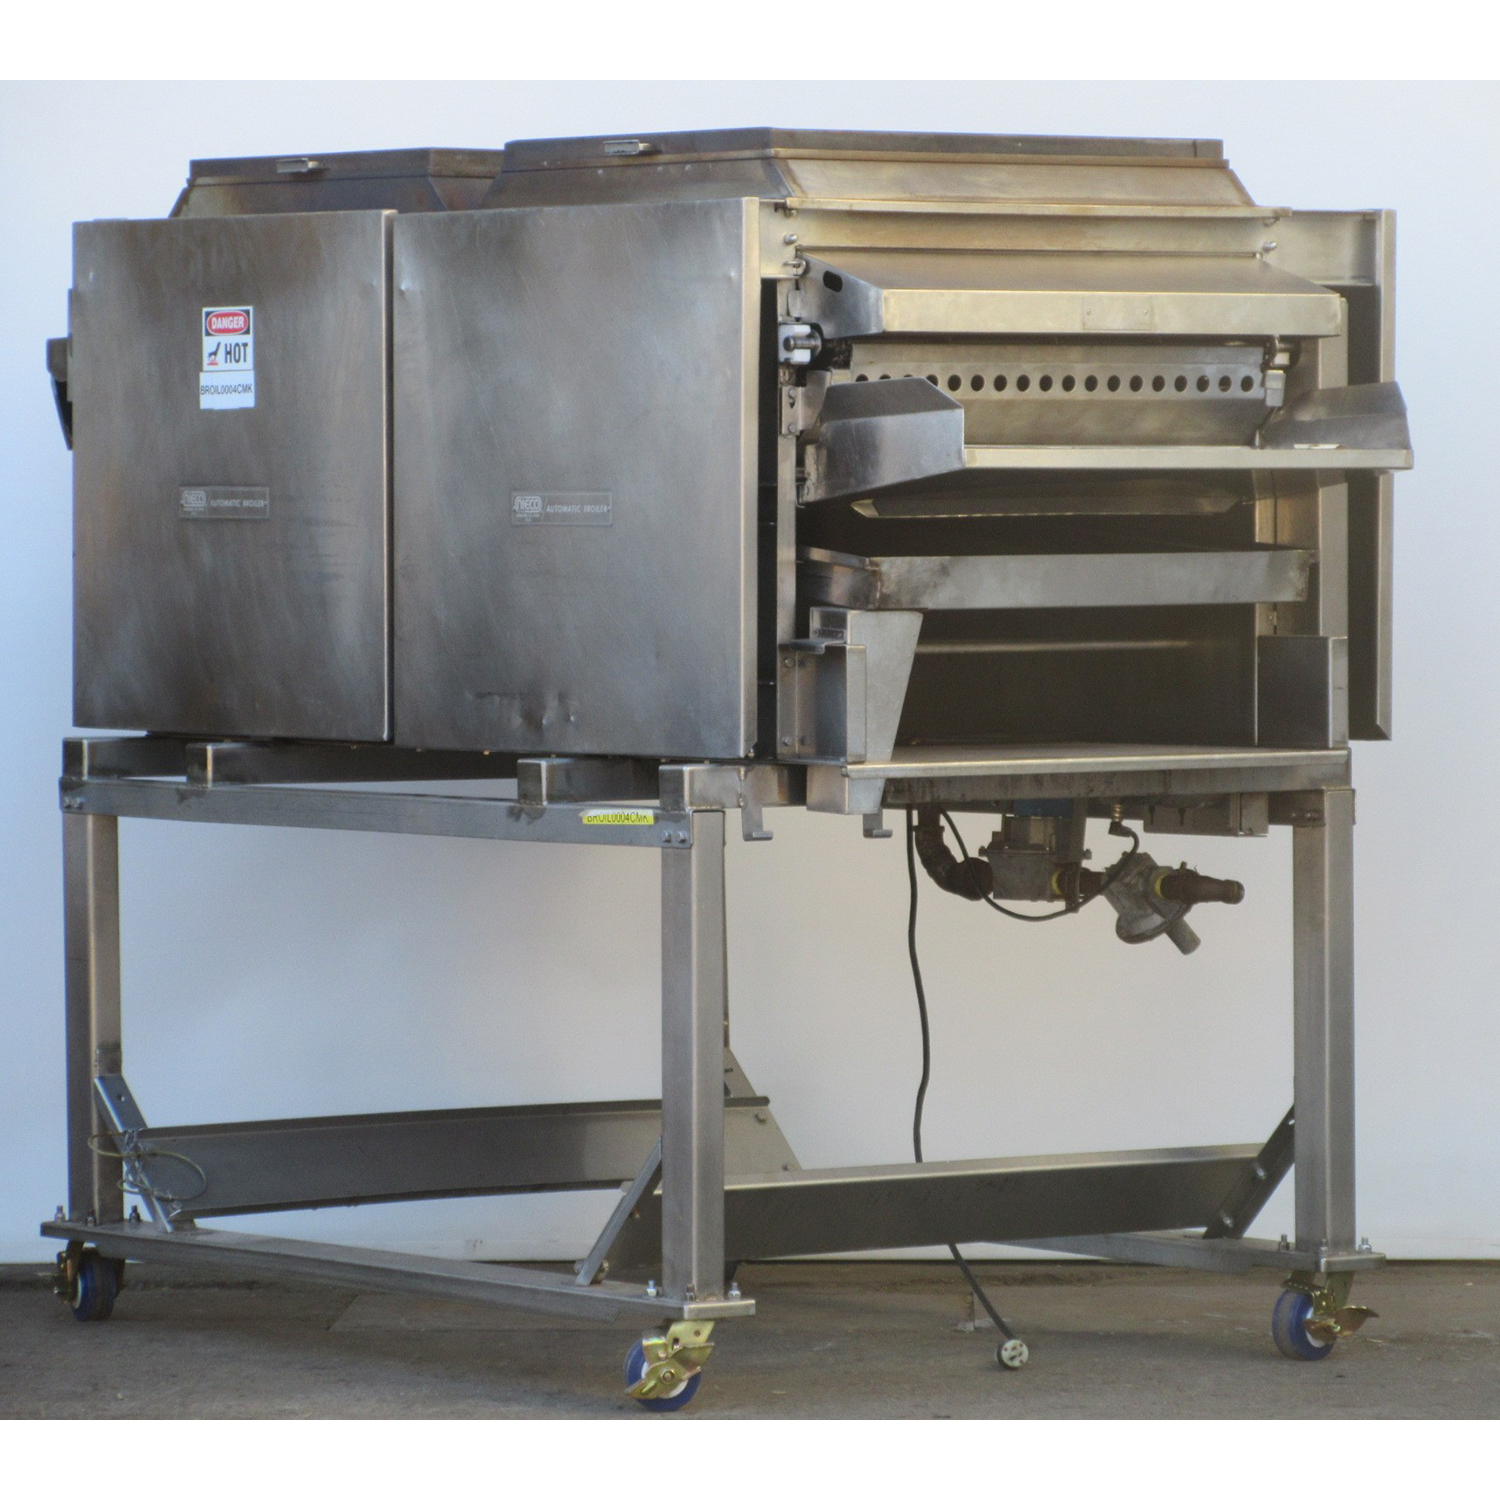 Nieco N2500 Automatic Conveyor Broiler, Used Excellent Condition image 3